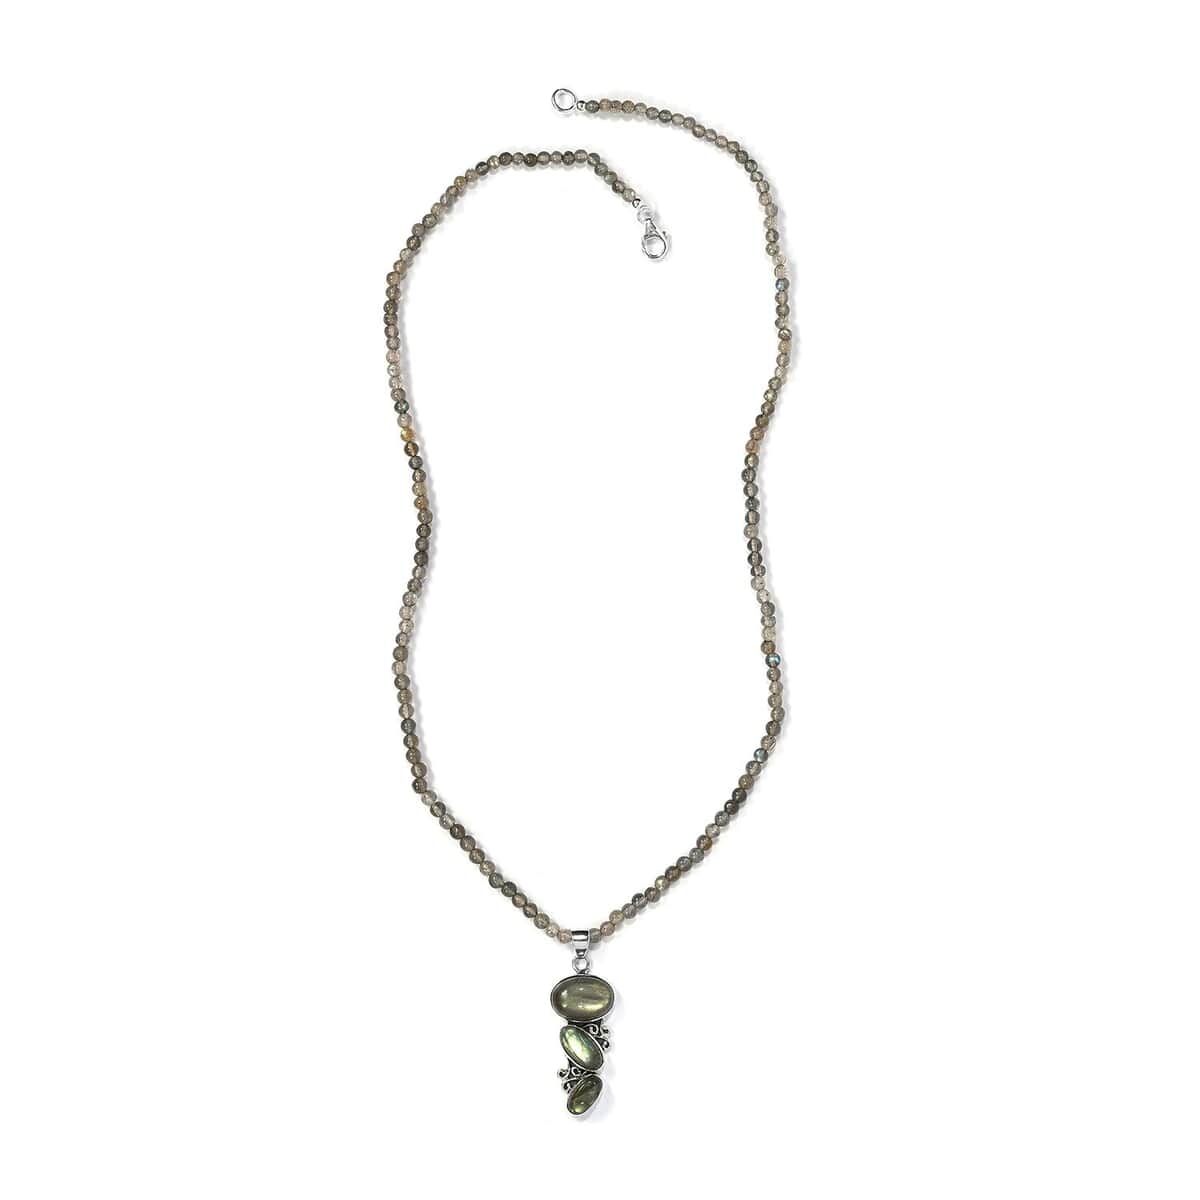 Malagasy Labradorite Bead Necklace in Sterling Silver, Labradorite Pendant, Silver Jewelry Gifts 53.85 ctw (20 Inches) image number 3